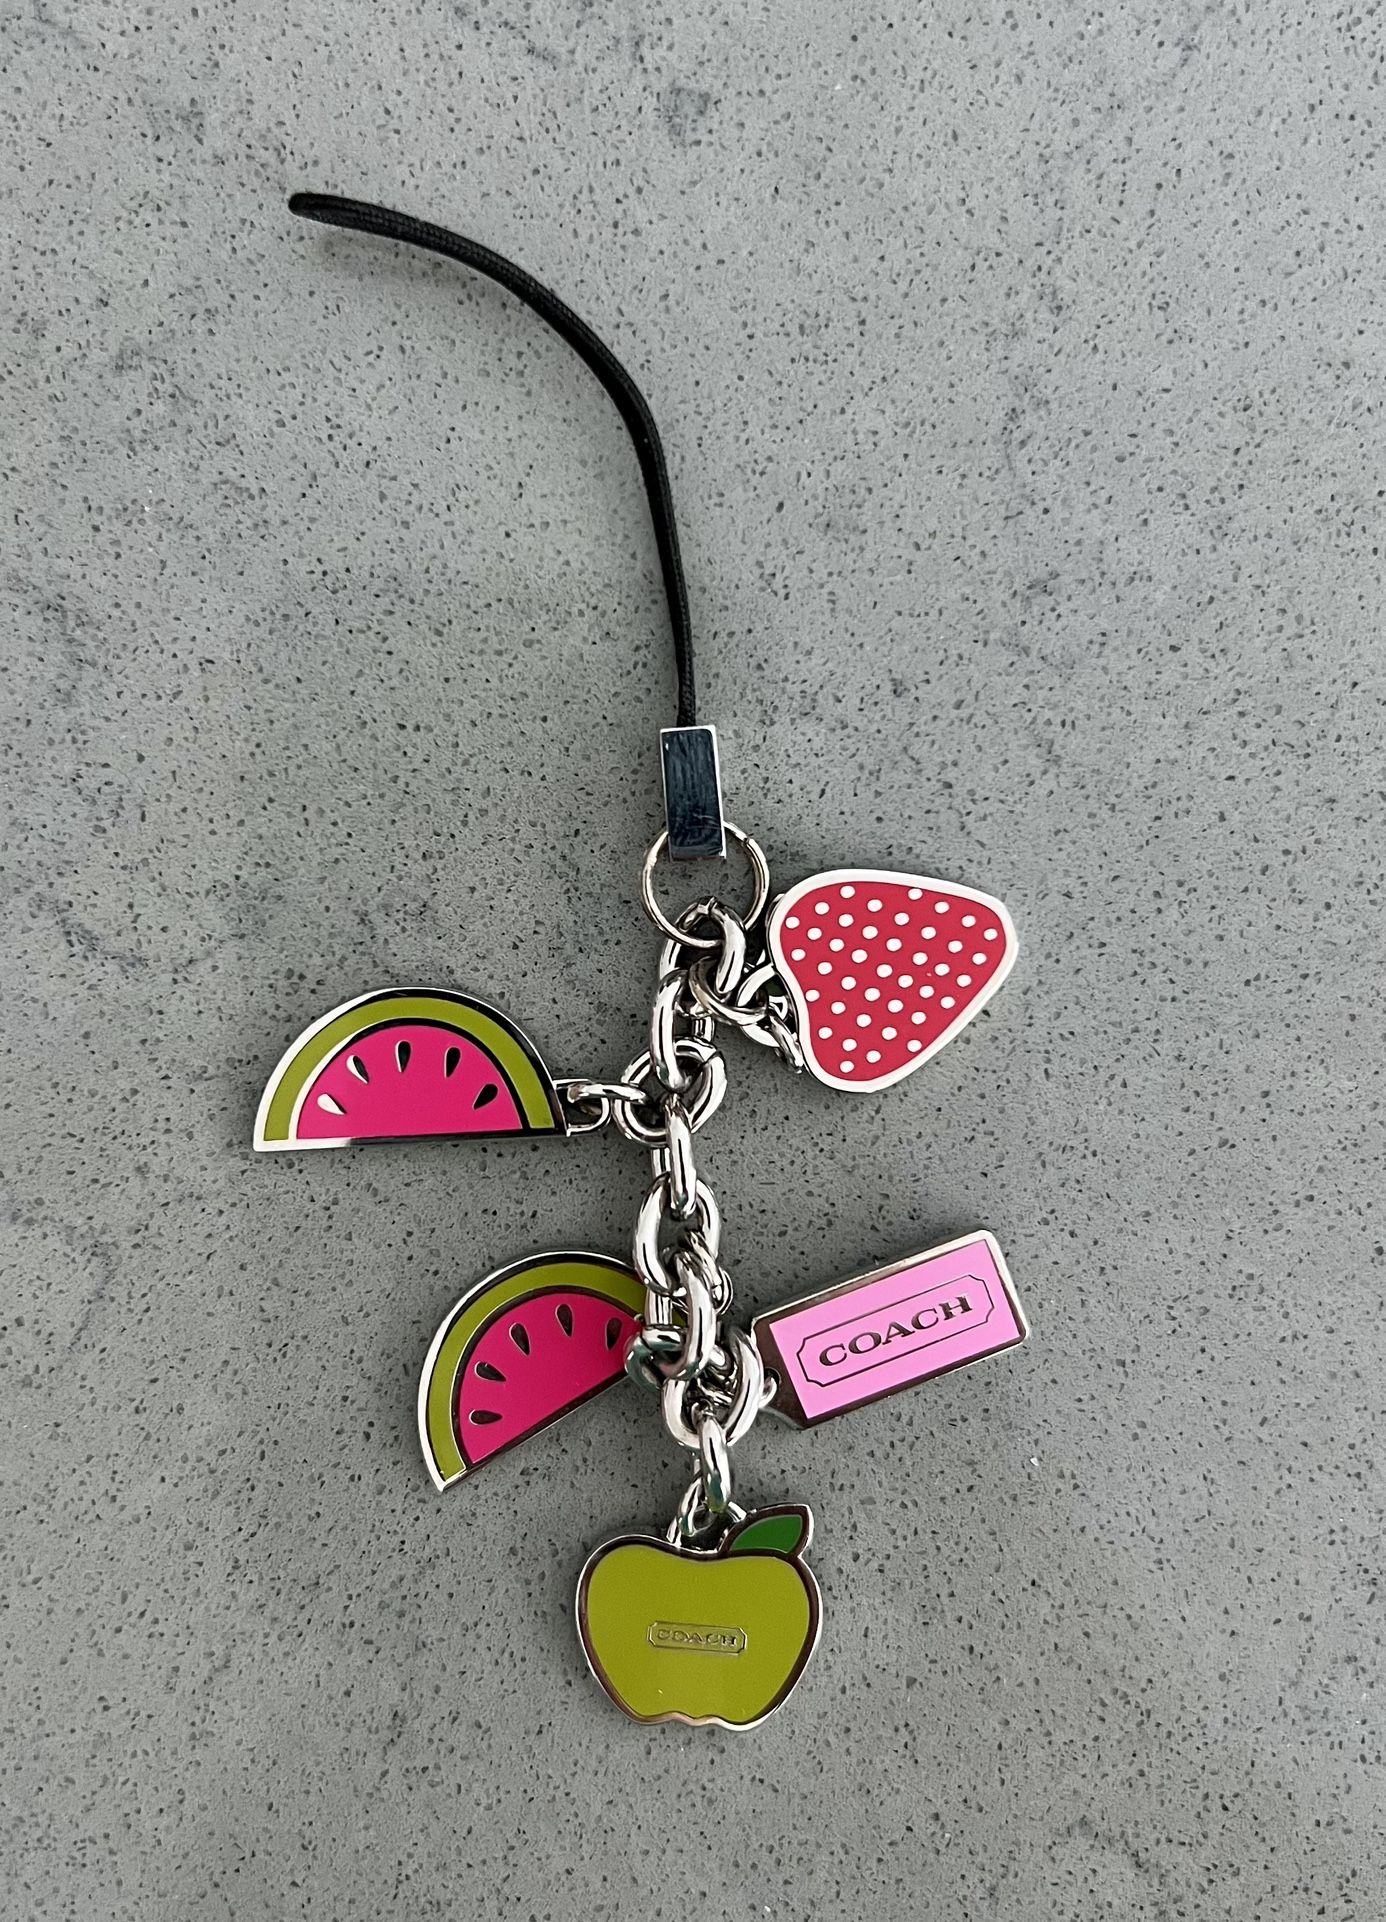 Authentic Coach Purse/Phone Charm.  Spring/Summer Fruits! Watermelon, Apple, Strawberry- New!